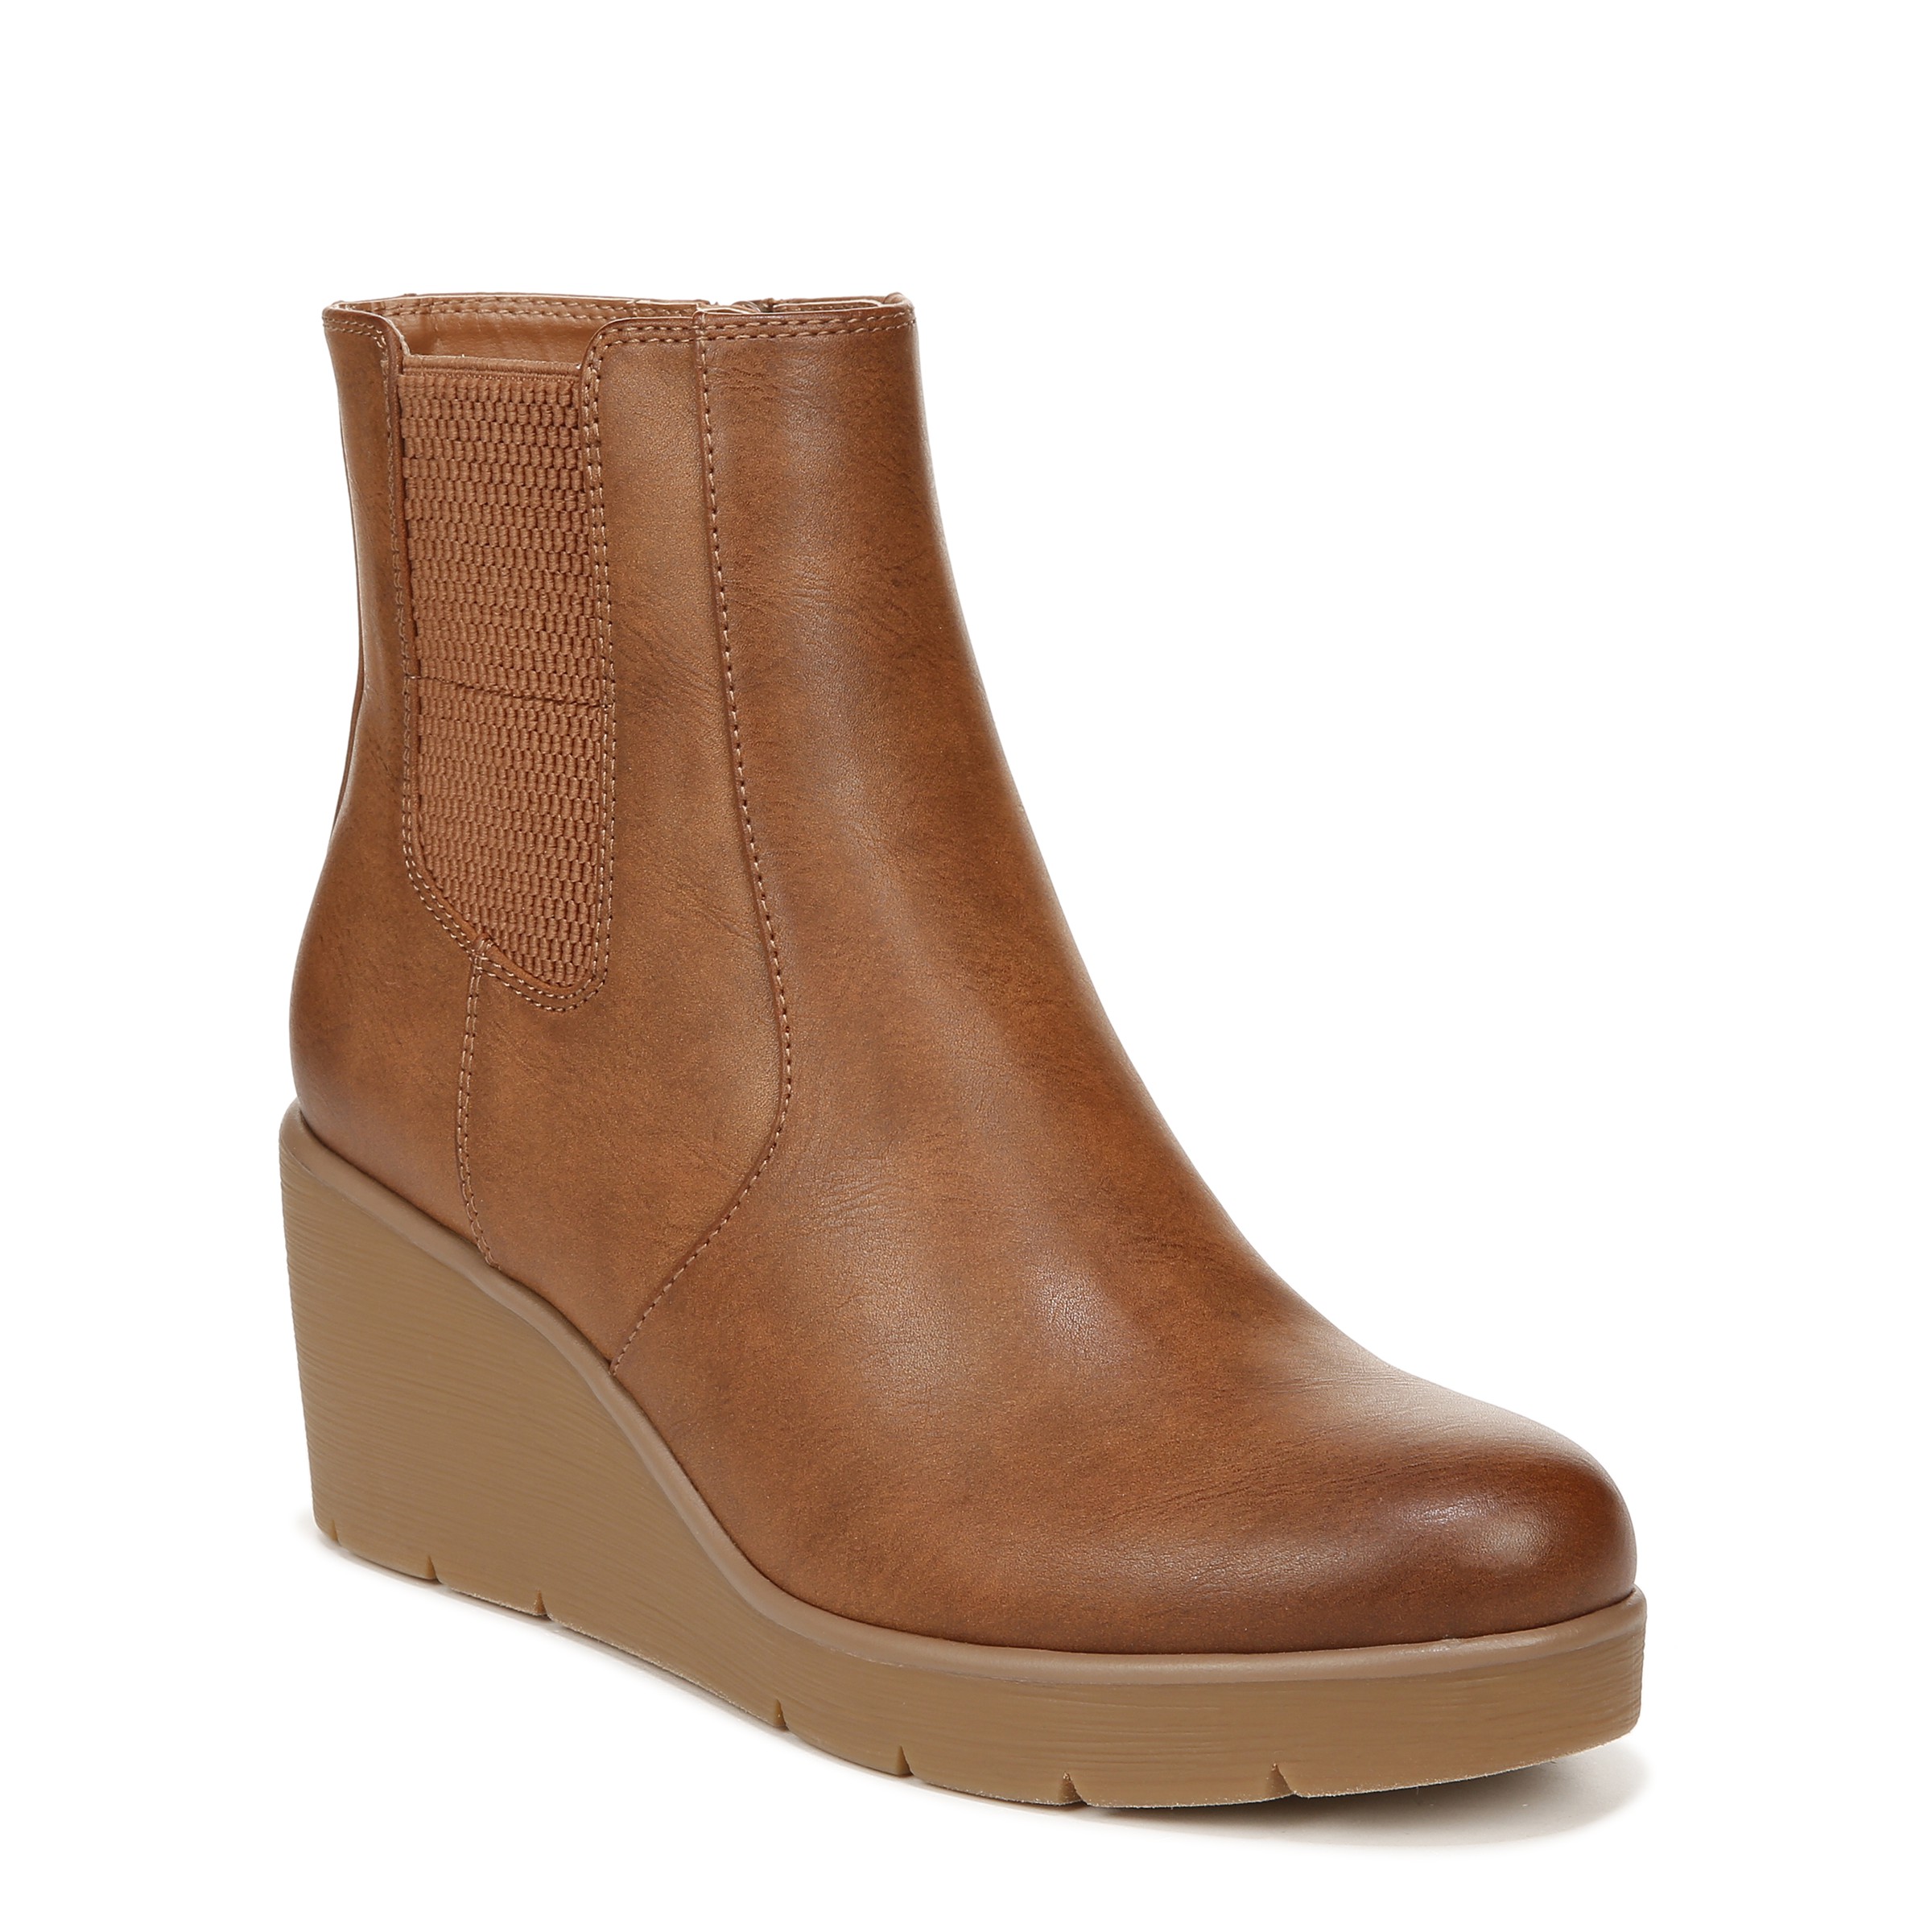 Naturalizer SOUL Haley Wedge Bootie